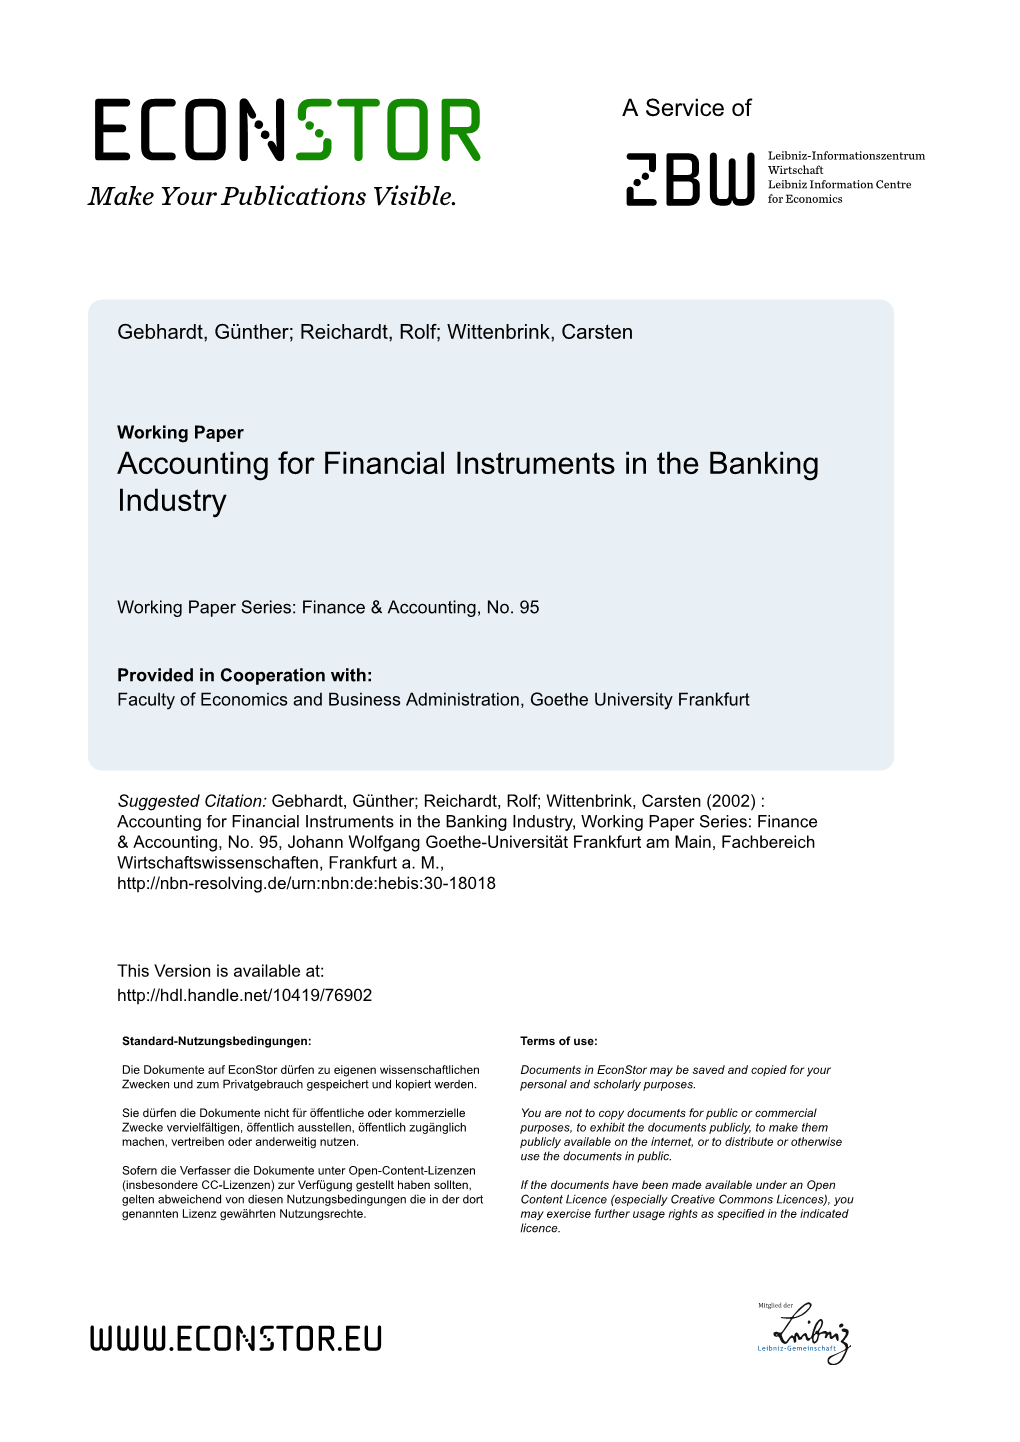 Accounting for Financial Instruments in the Banking Industry